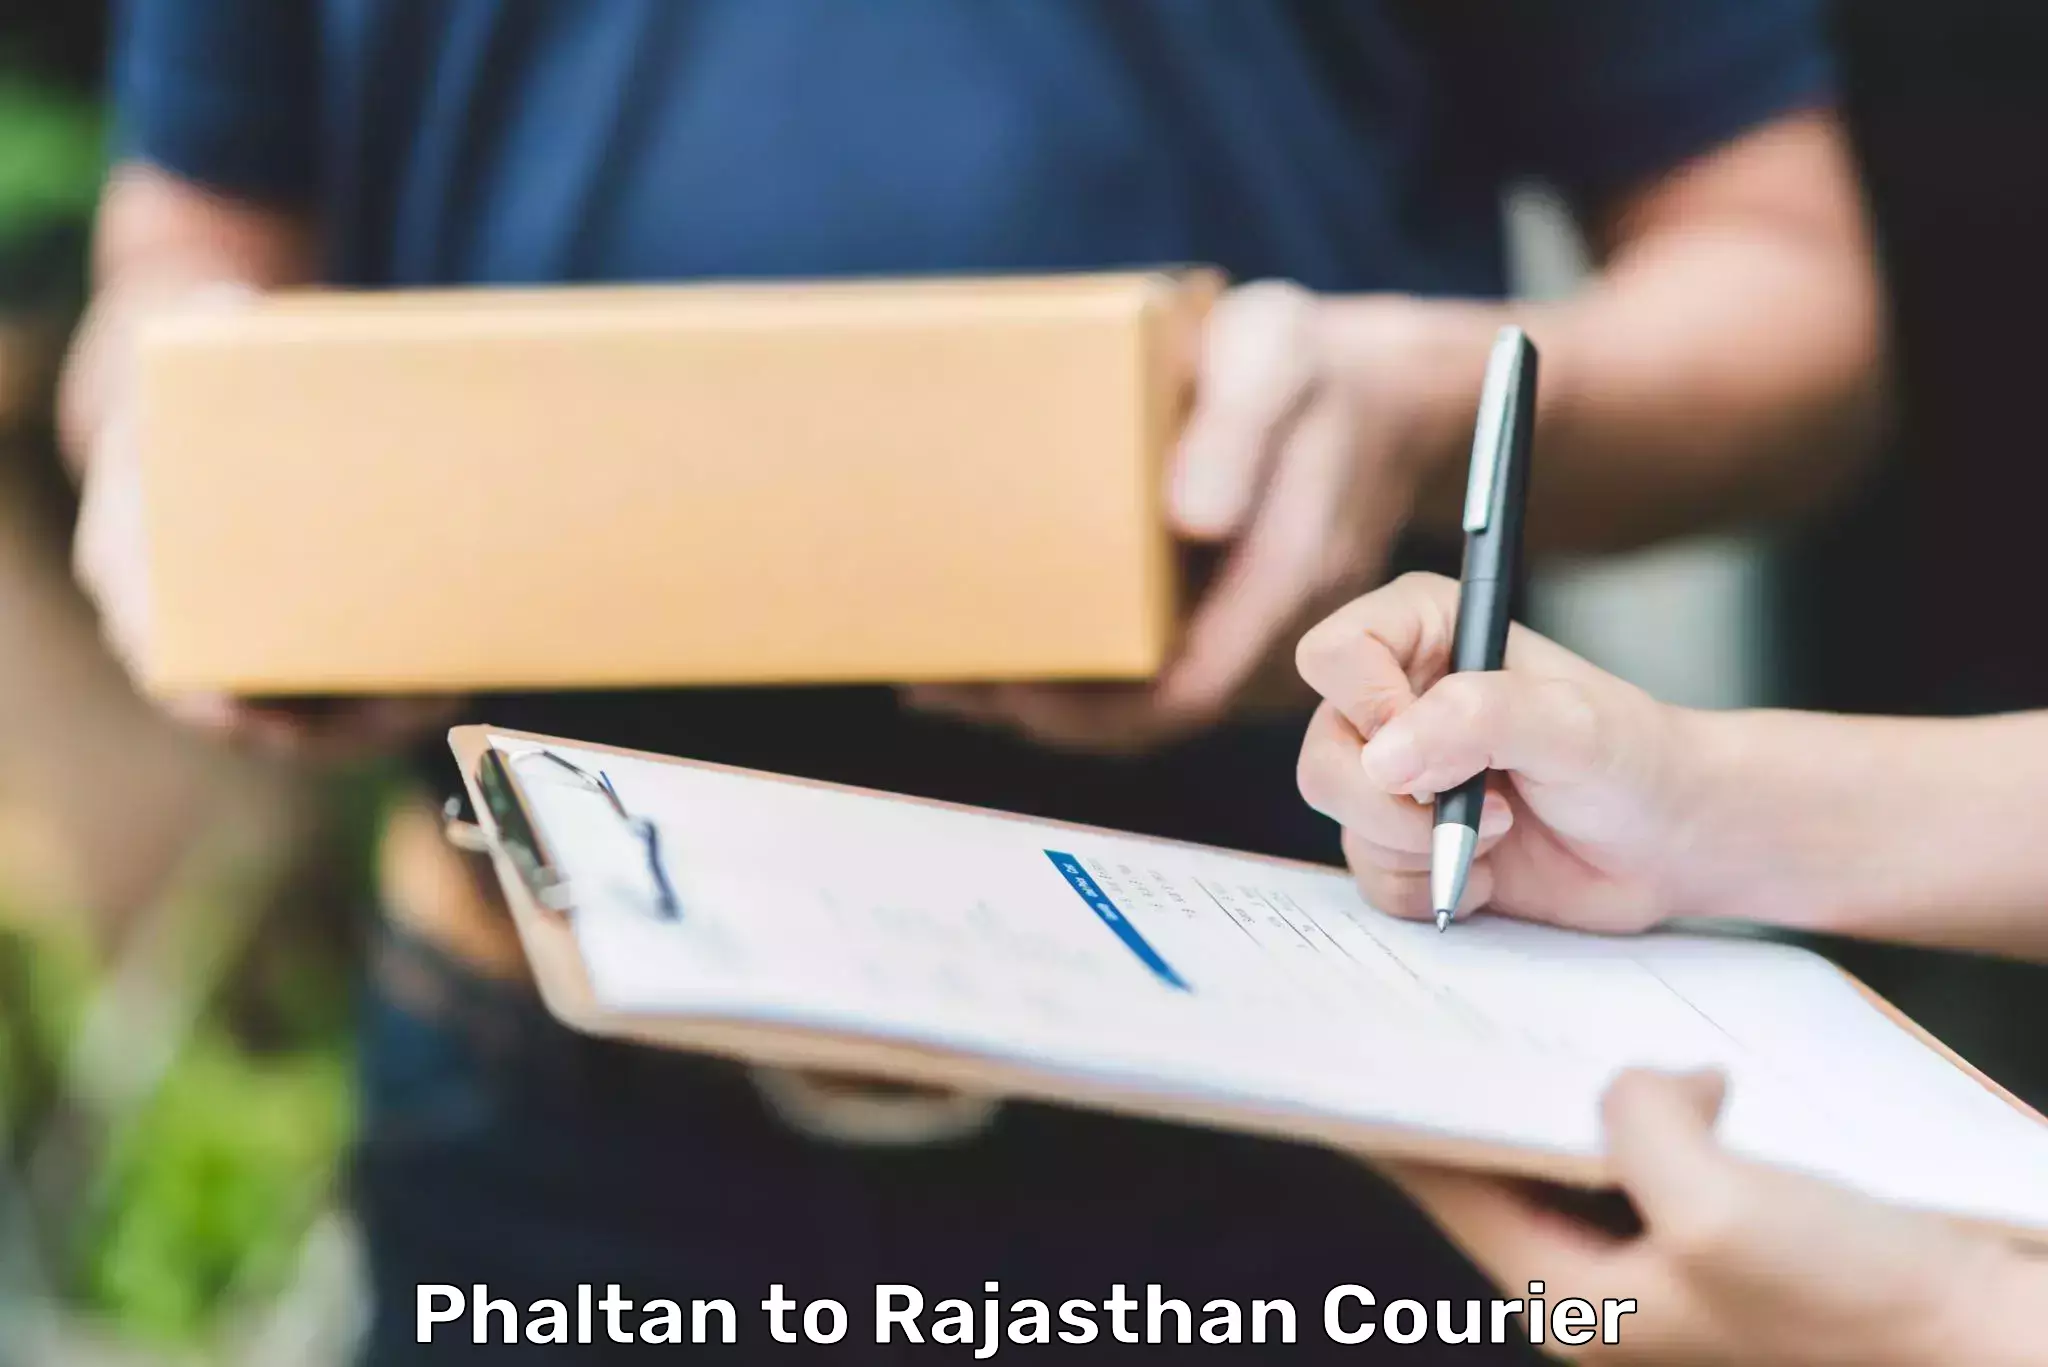 Local delivery service Phaltan to Kuchaman